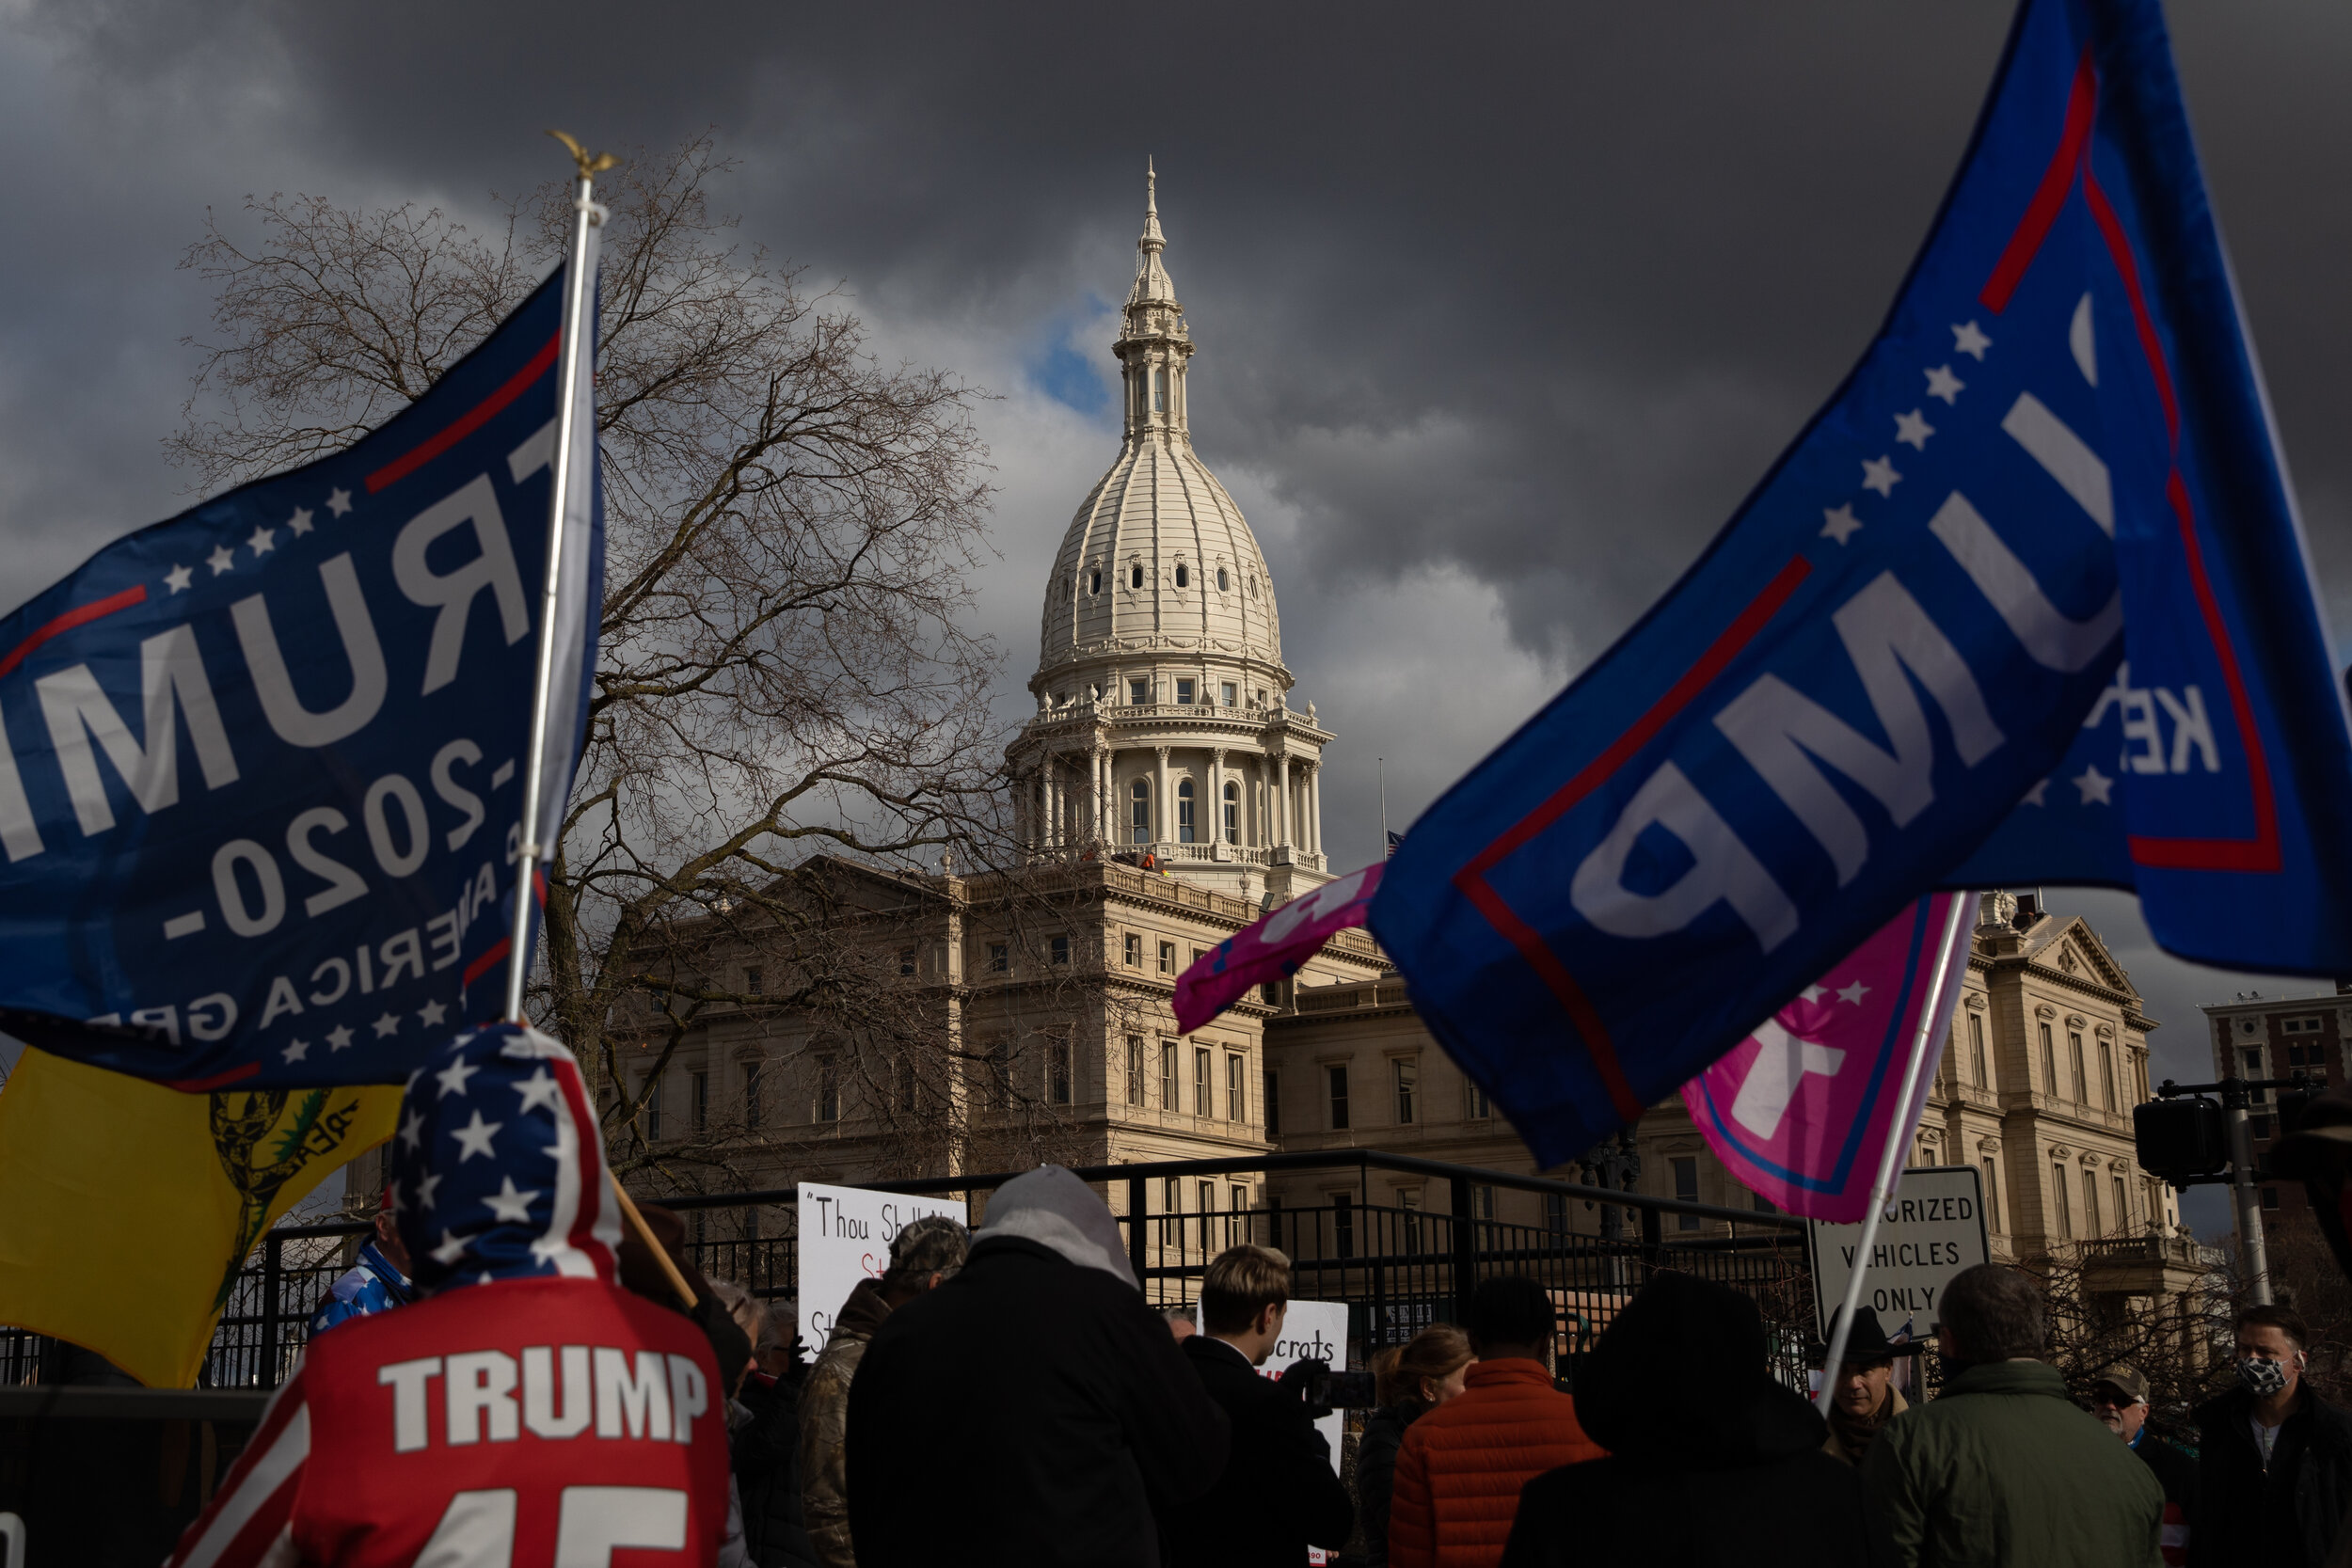  Supporters of U.S. President Donald Trump protest election results outside the State Capitol building in Lansing, Michigan on November 23, 2020. Additionally, hundreds of demonstrators participated in a car caravan calling for the state board of can